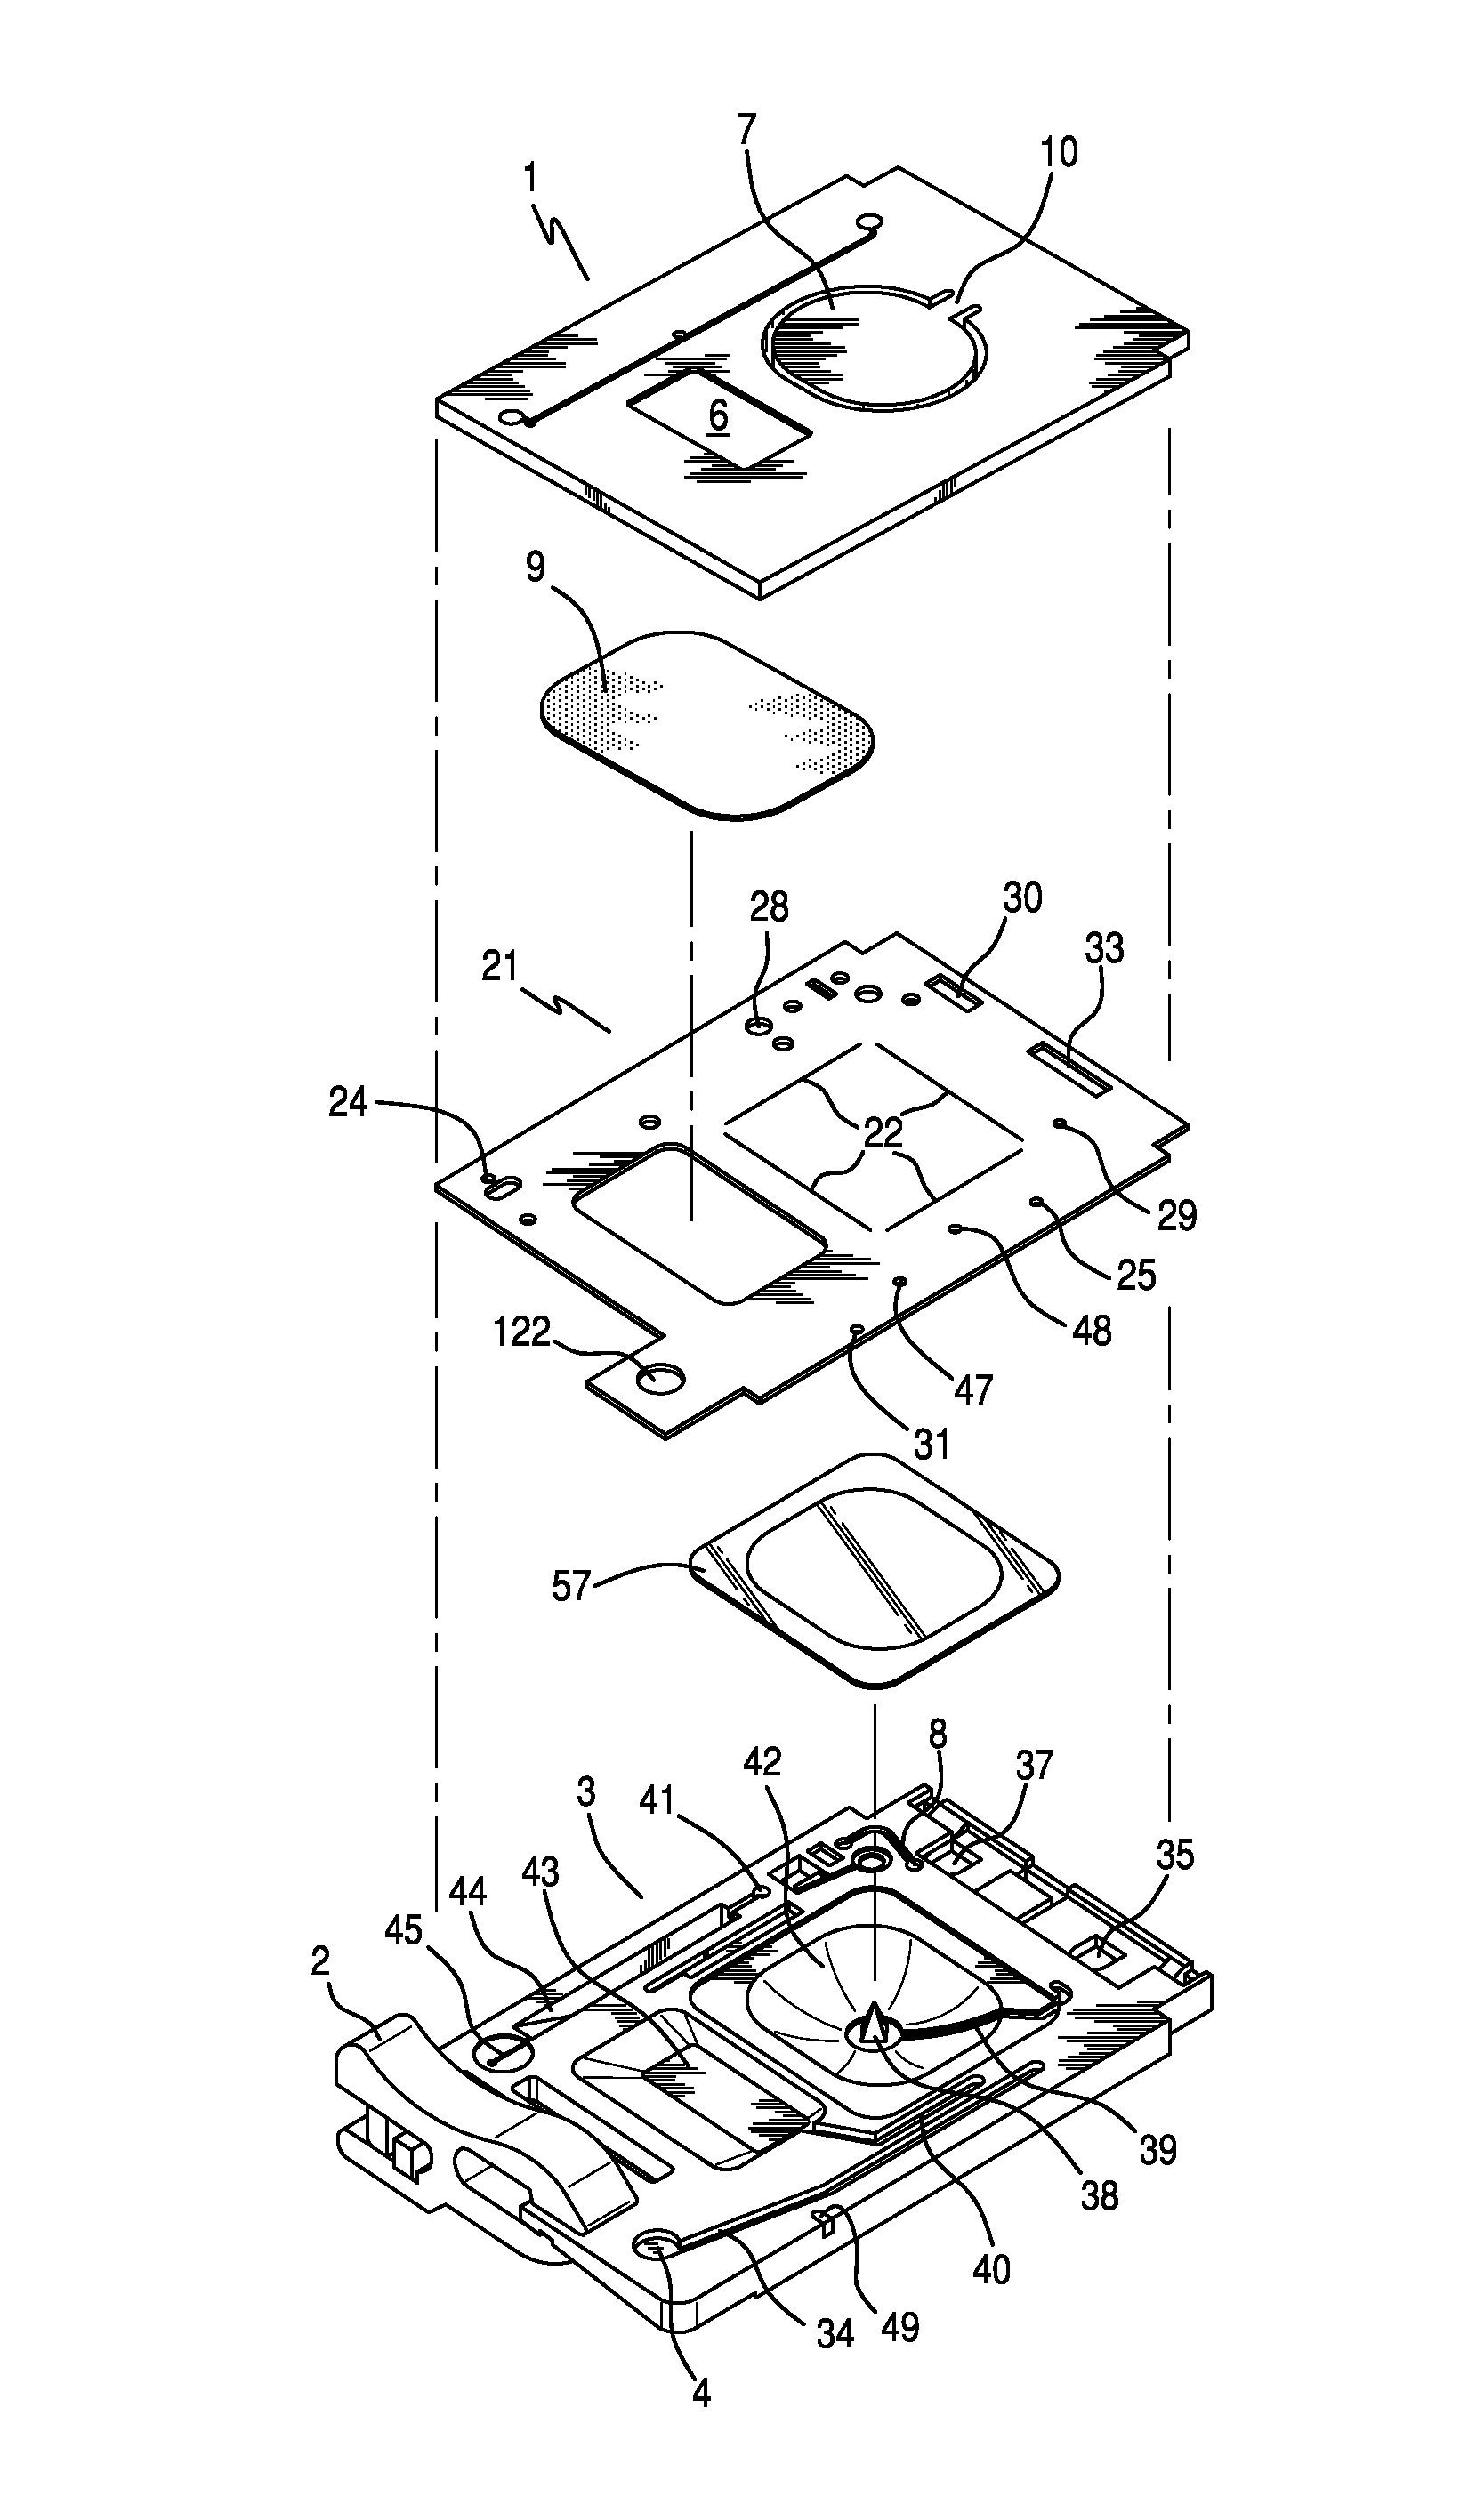 Assay devices with integrated sample dilution and dilution verification and methods of using same